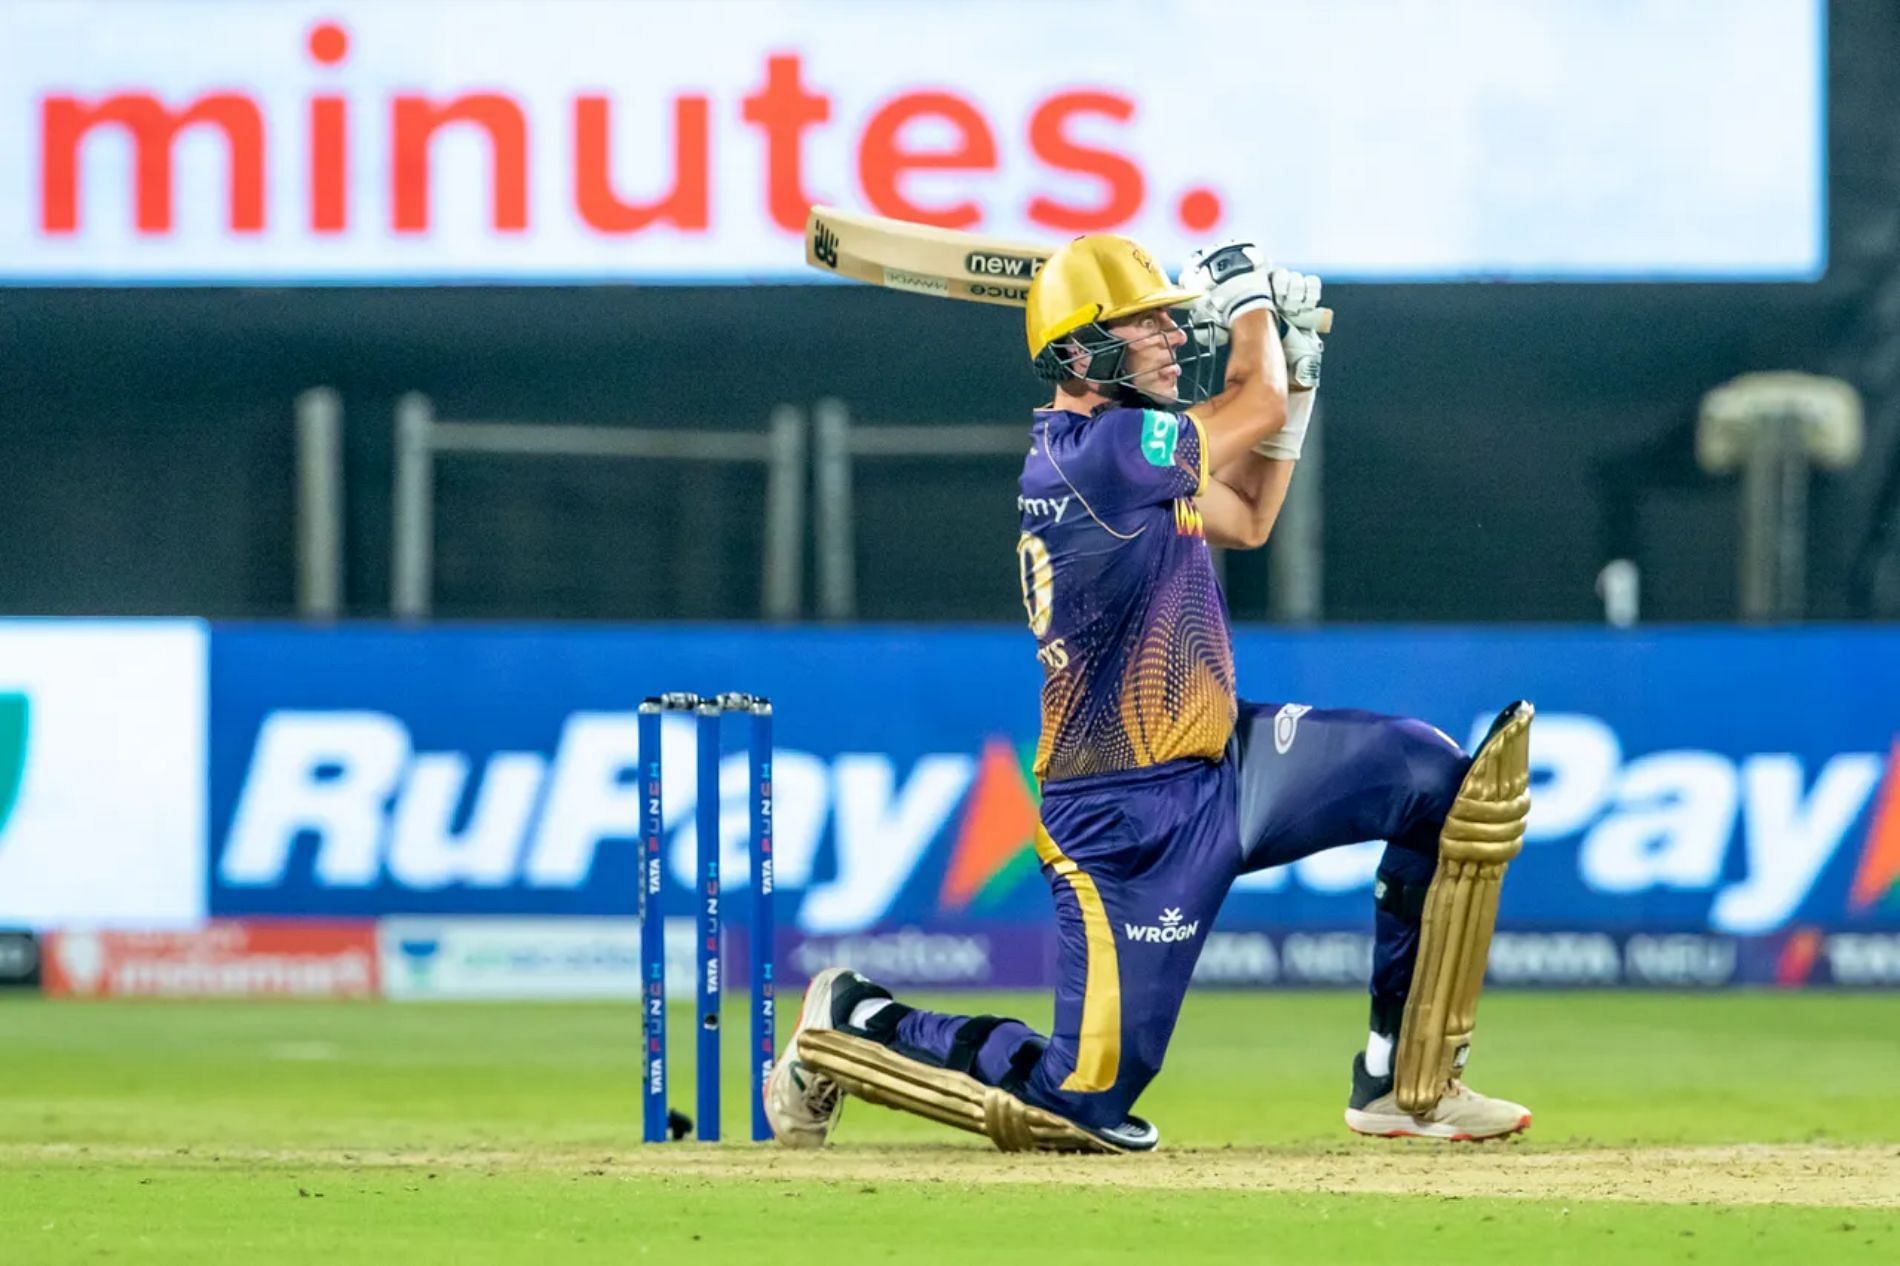 Pat Cummins was unstoppable on Wednesday. Pic: IPLT20.COM